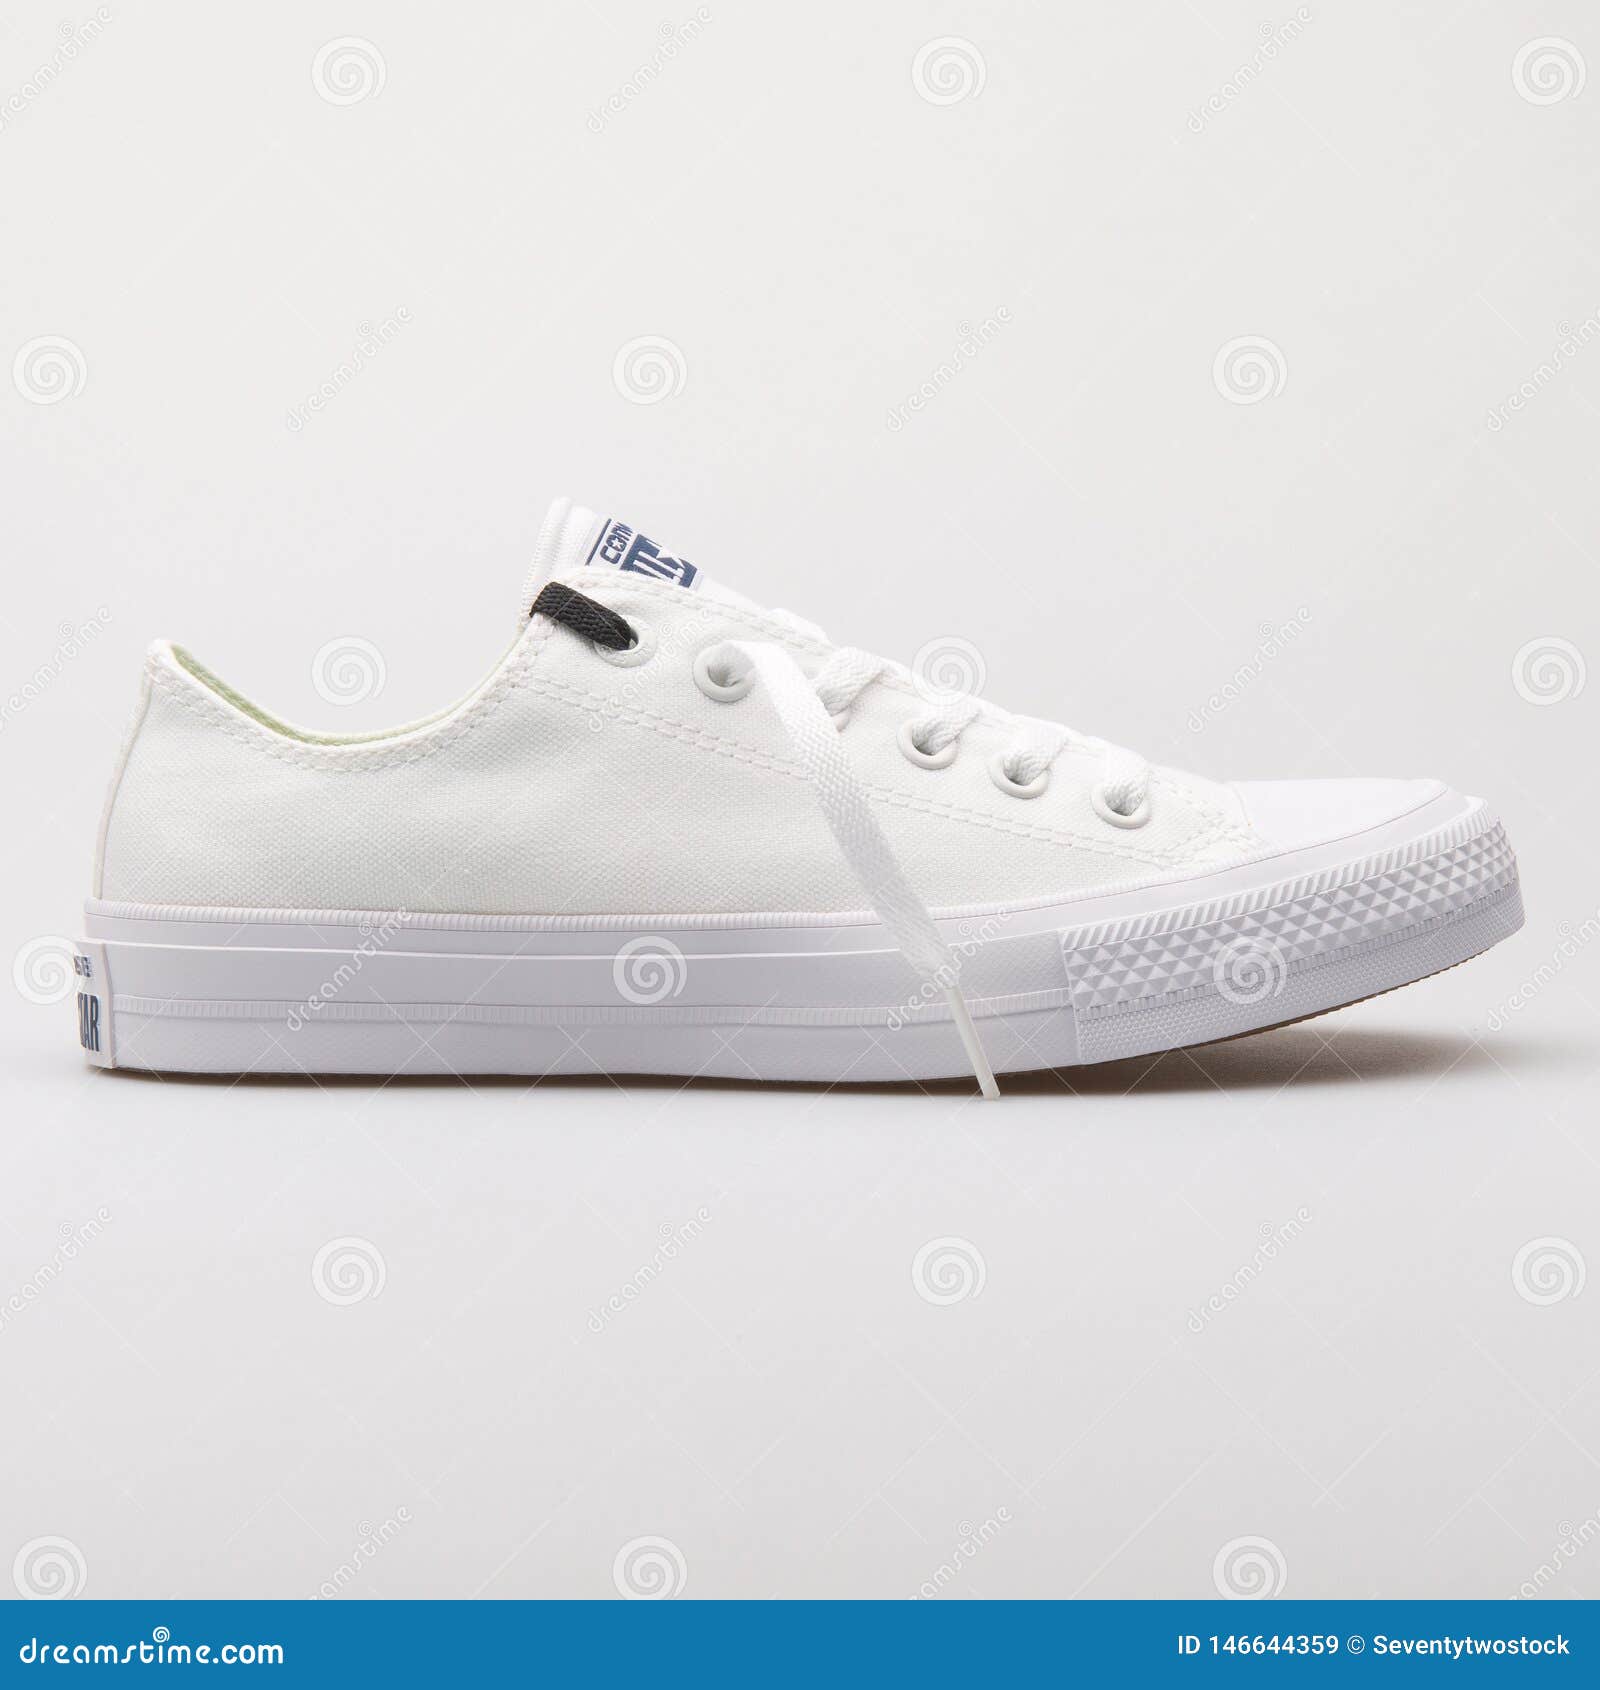 Converse Chuck Taylor All Star 2 OX White Sneaker Editorial Stock Image - of sneaker, mens: 146644359